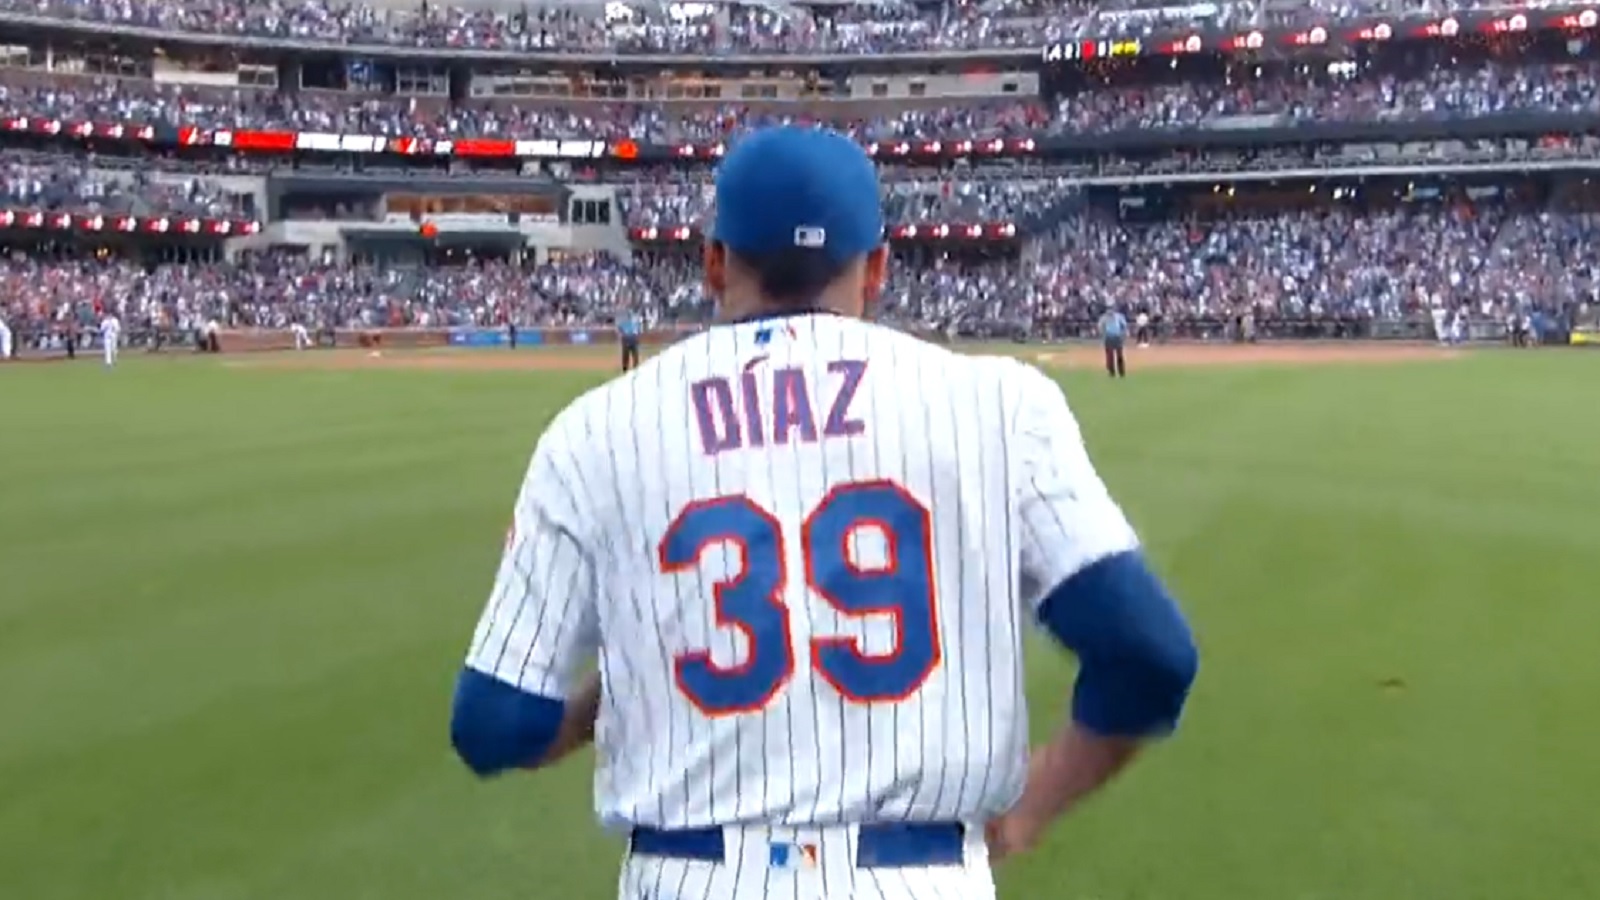 New York Mets closer Edwin Diaz's entrance gets the people going - ESPN